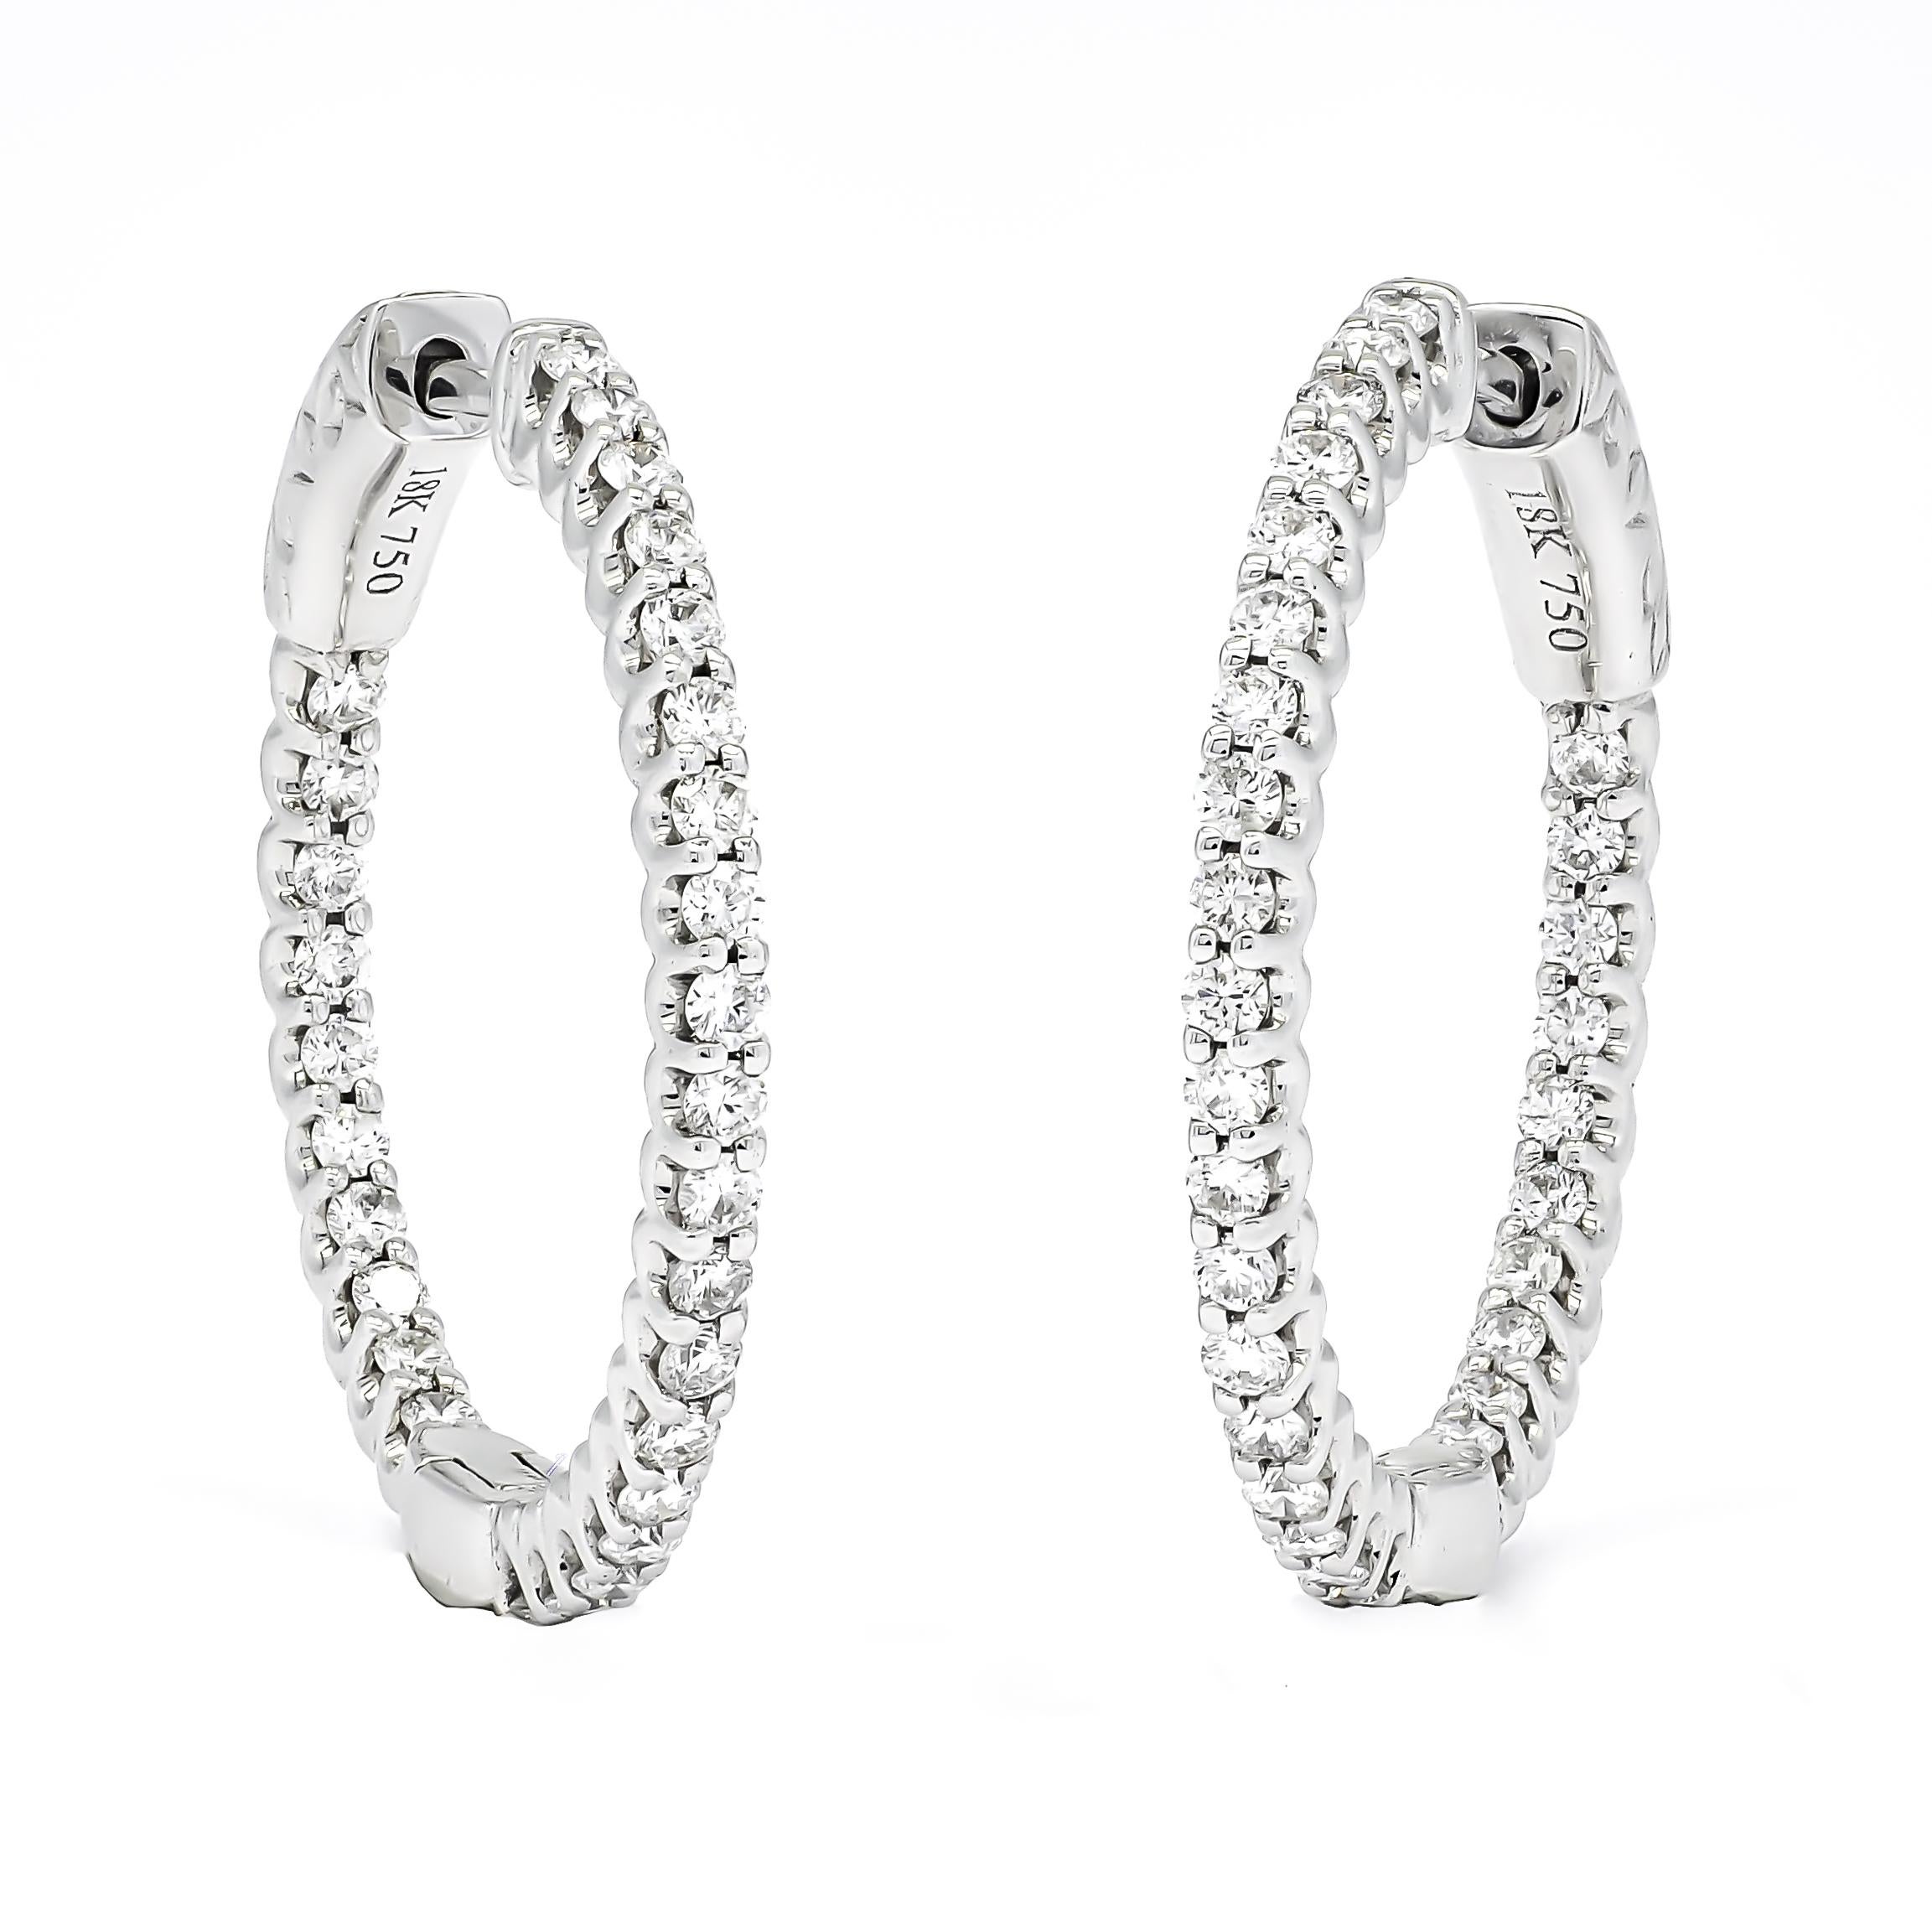 Introducing our exquisite Natural Diamond Hoops in 18KT White Gold—a true embodiment of elegance and luxury. These Single Row Diamond Hoop Earrings are meticulously crafted to elevate your style and make a lasting impression.

Designed with utmost